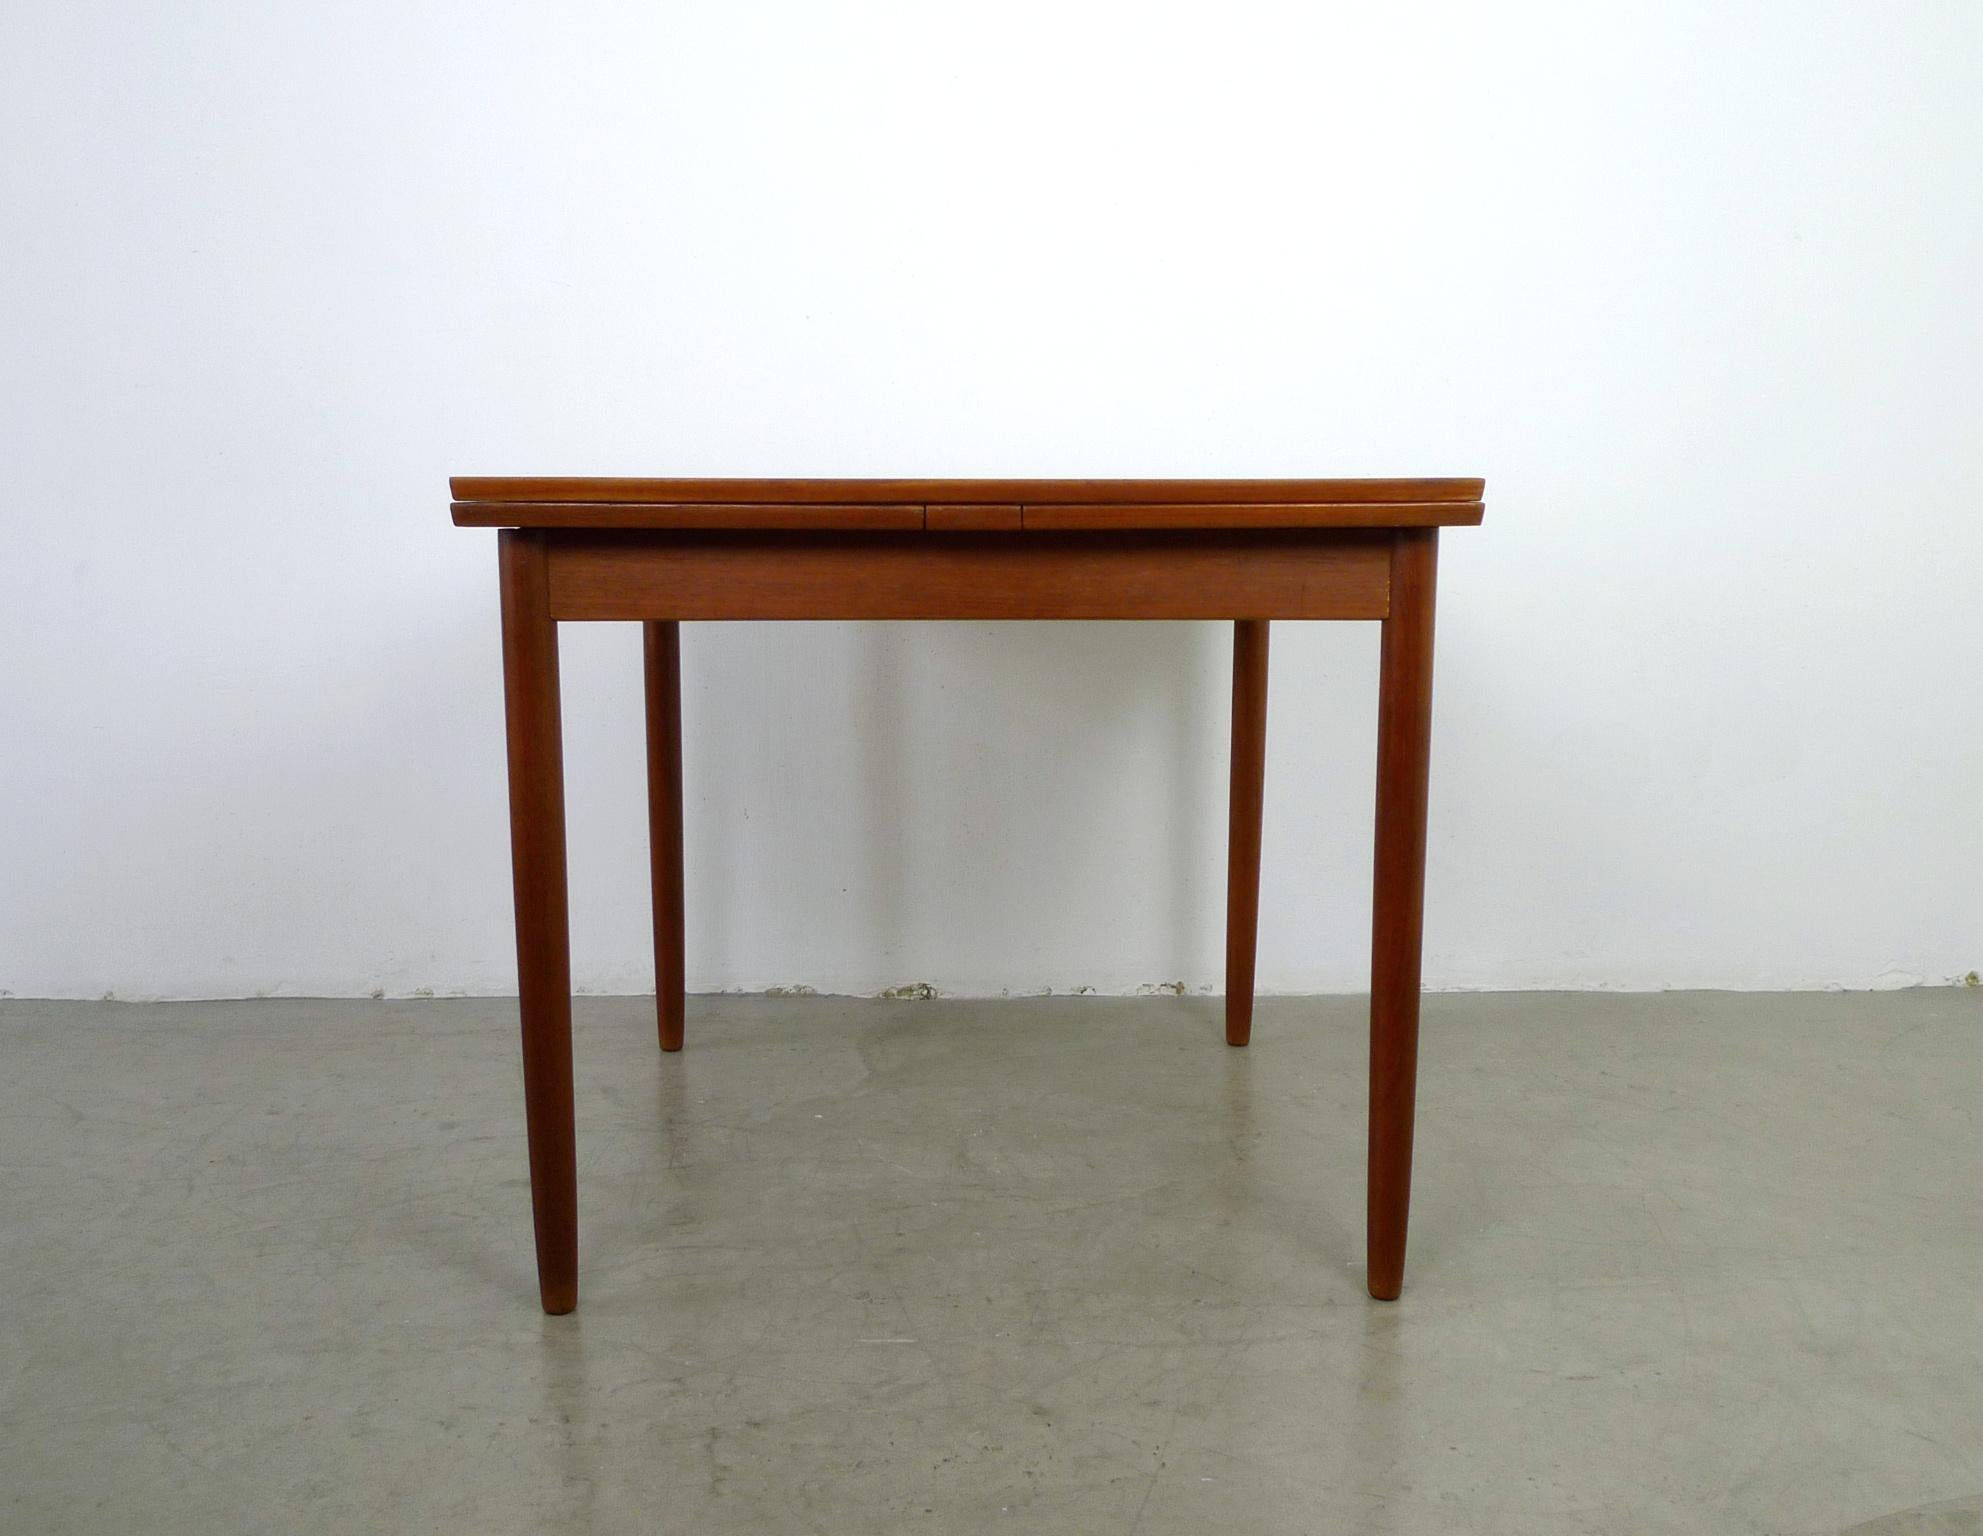 This piece is a square teak dining table with two 38 cm extension plates that extend the table to a total length of 161 cm. The table dimensions without extension plates are given below. The dining table was made in Denmark in the 1960s and it is in